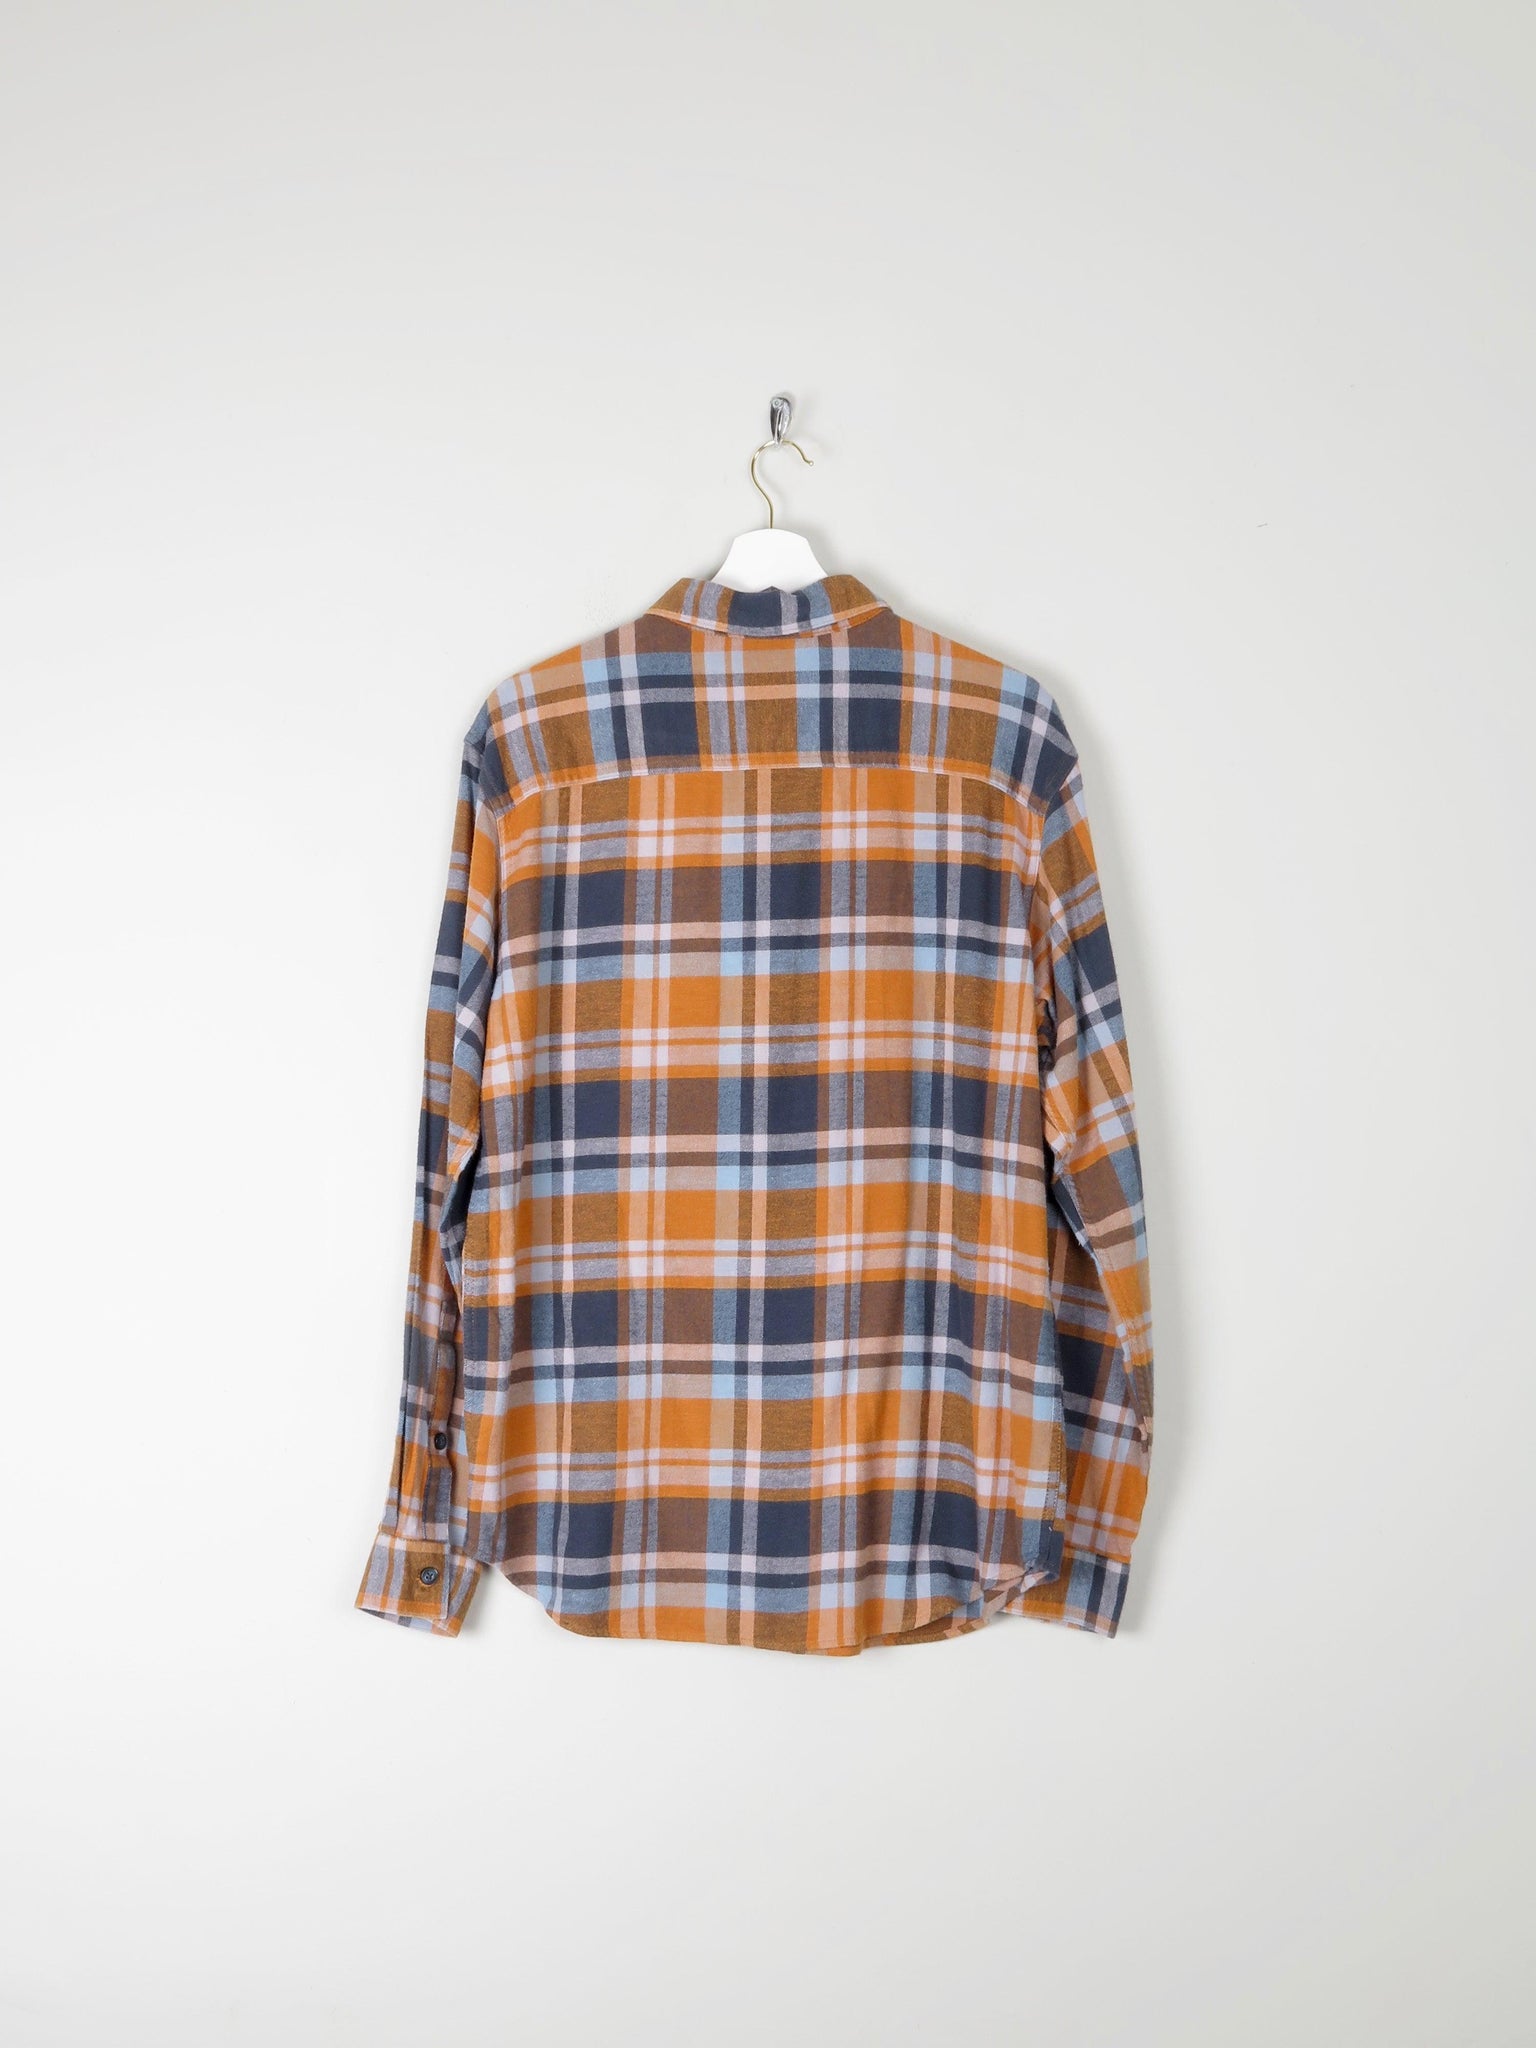 Men's Check Flannel Shirt M - The Harlequin